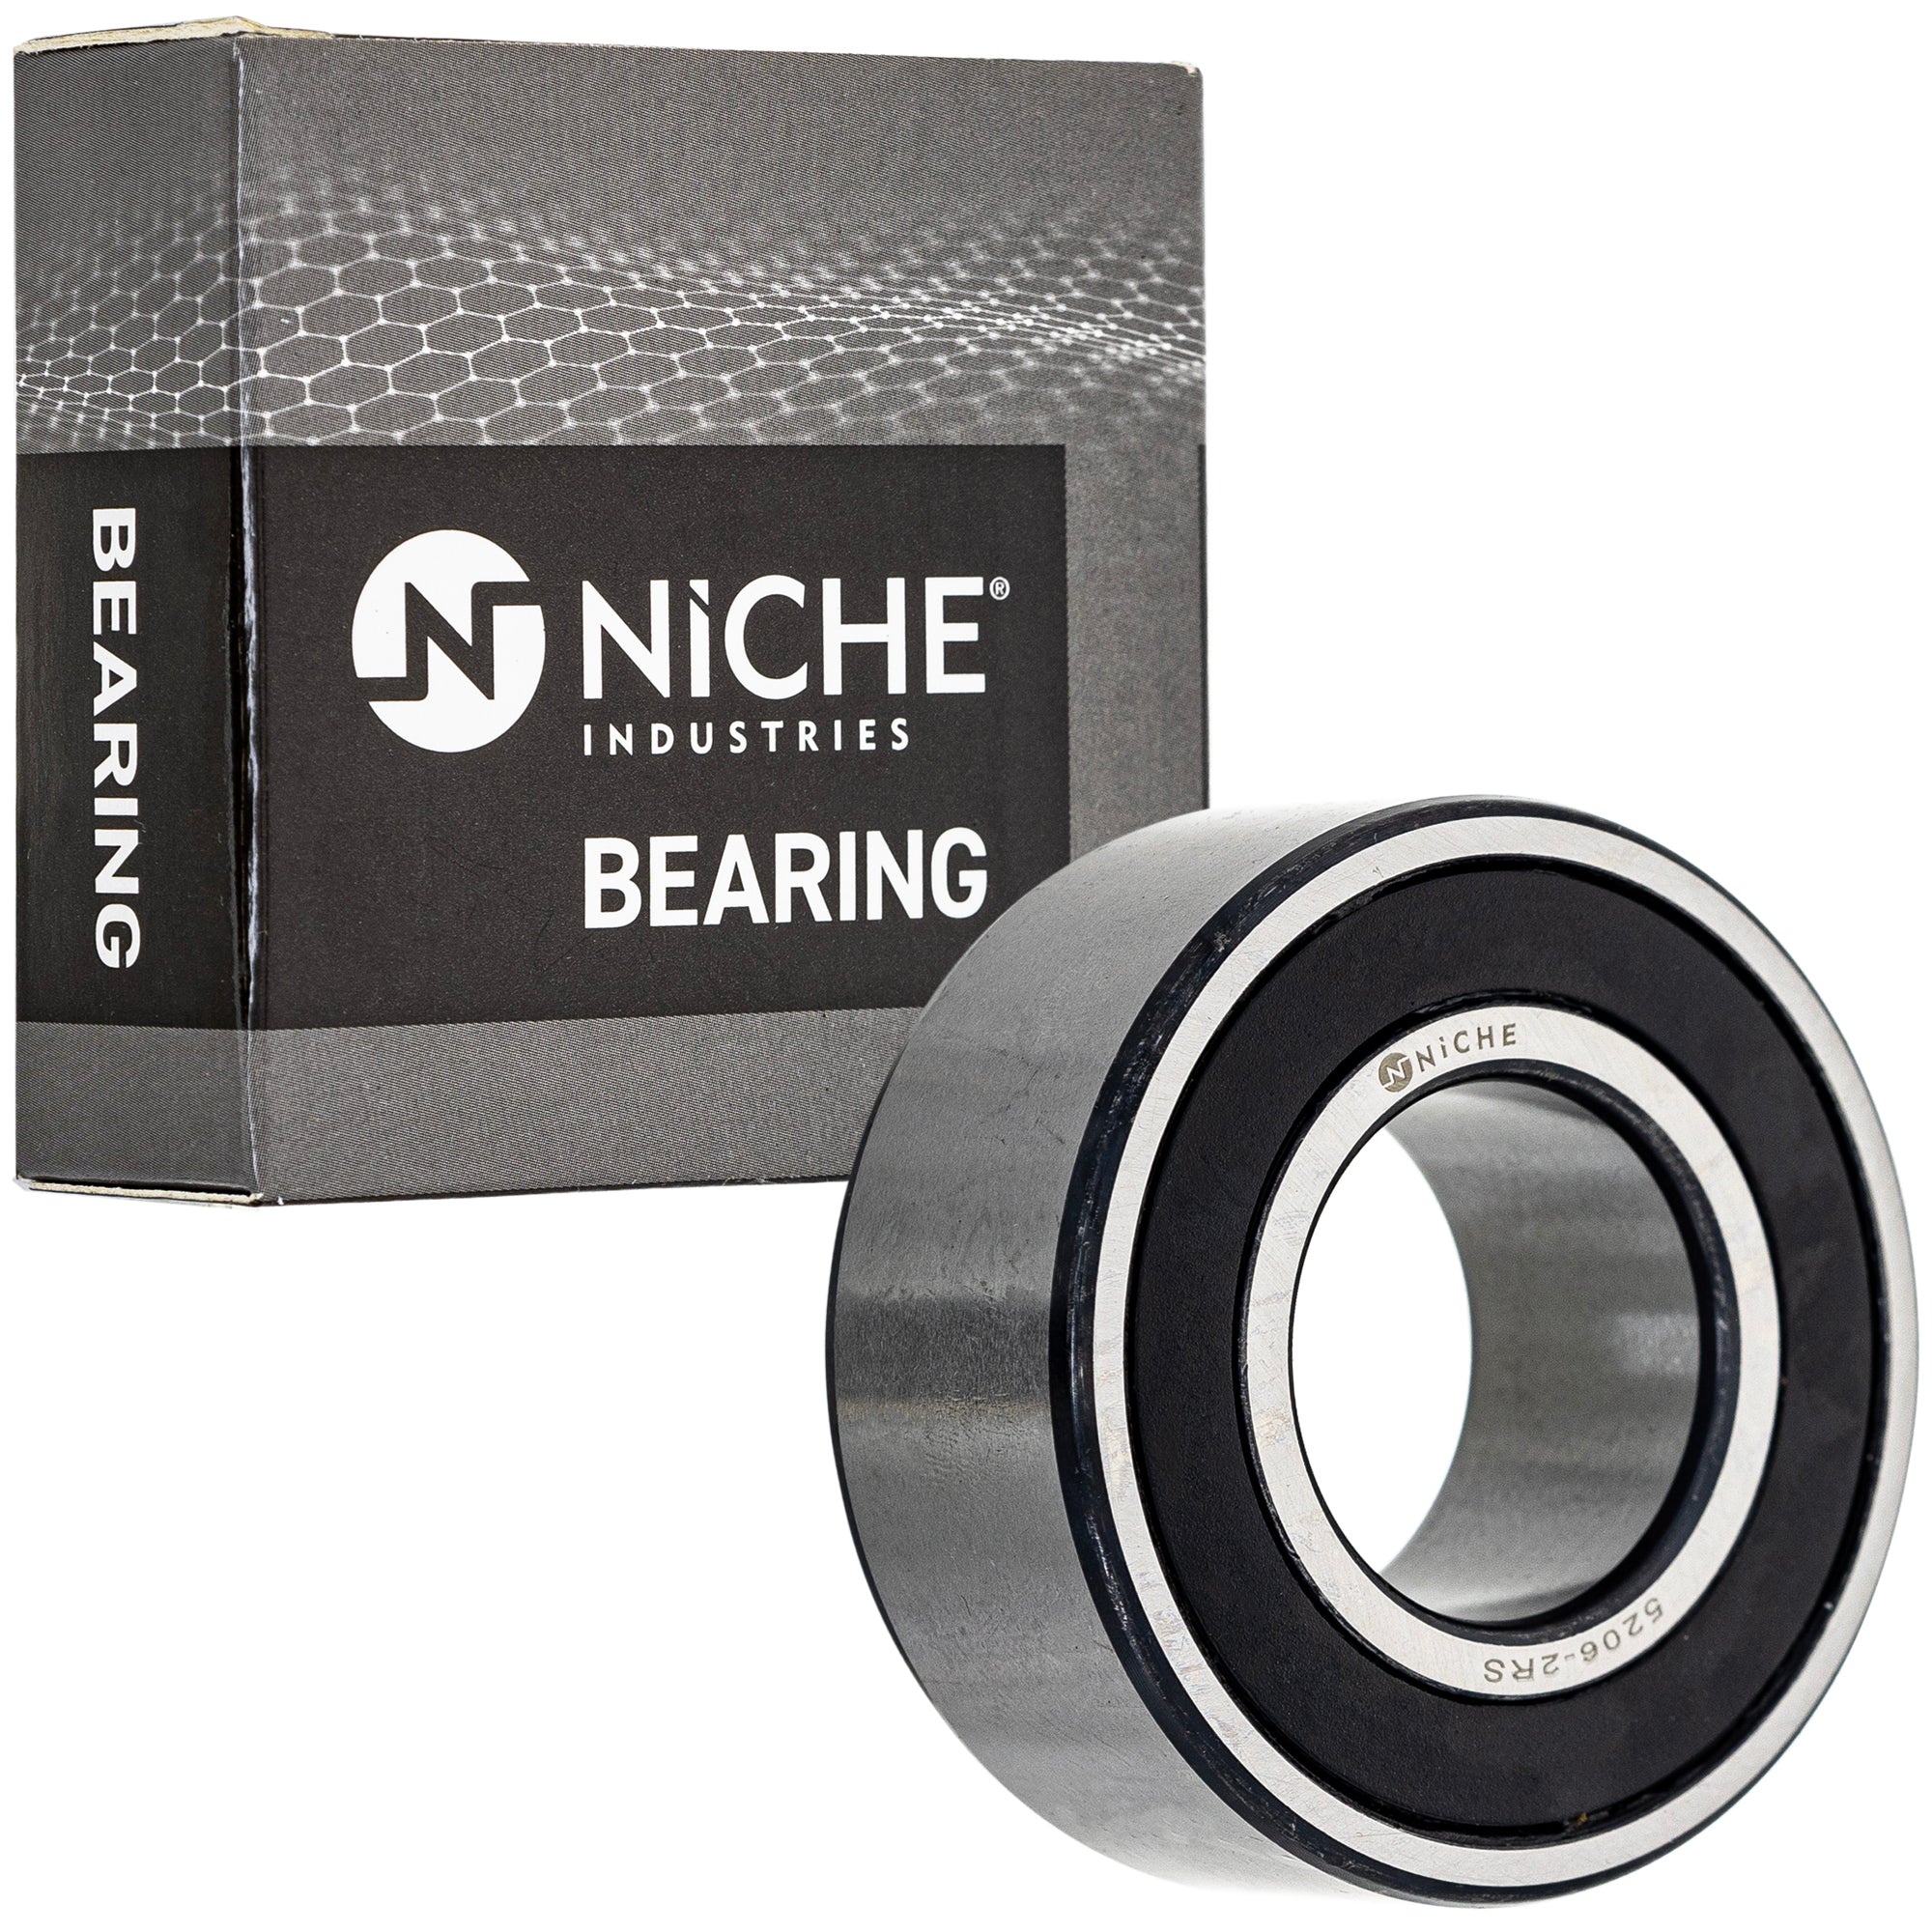 NICHE 519-CBB2266R Bearing 10-Pack for zOTHER Shadow Ranger ACE 950